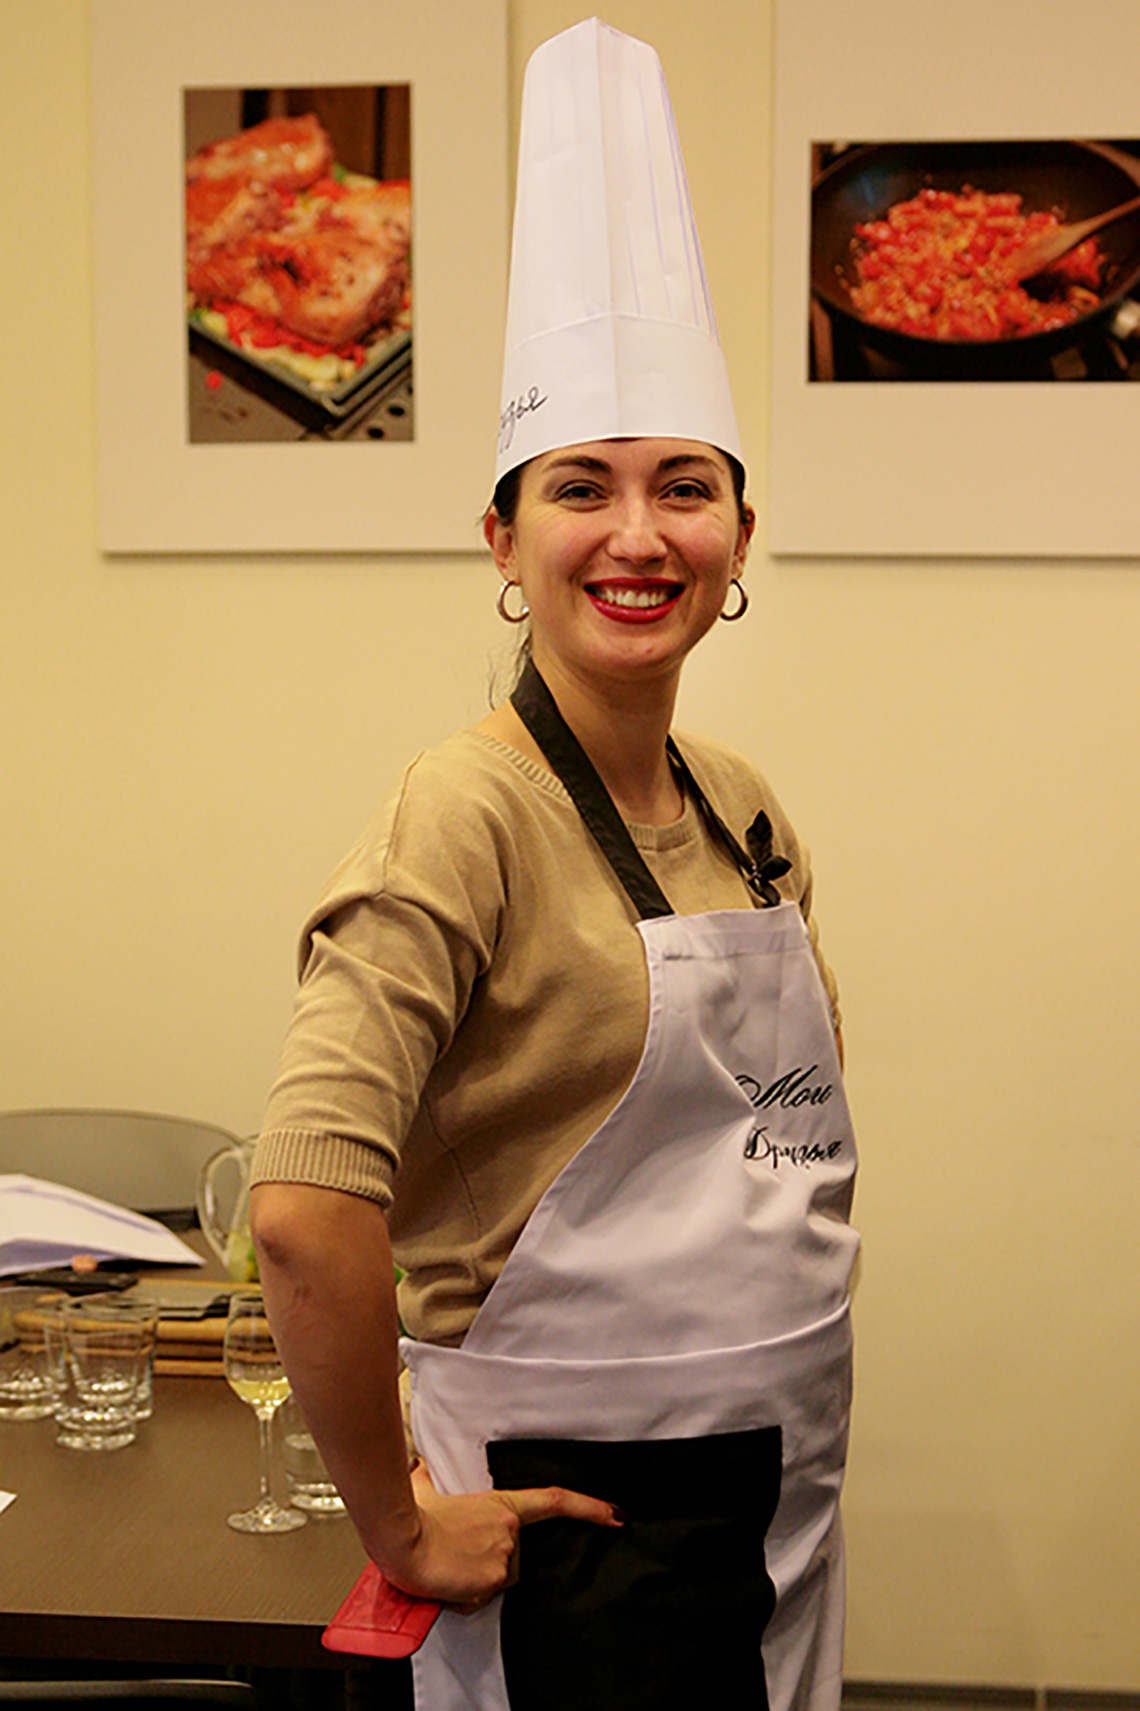 Lesson "Christmas in Alsace". Cooking classes in Ukraine.